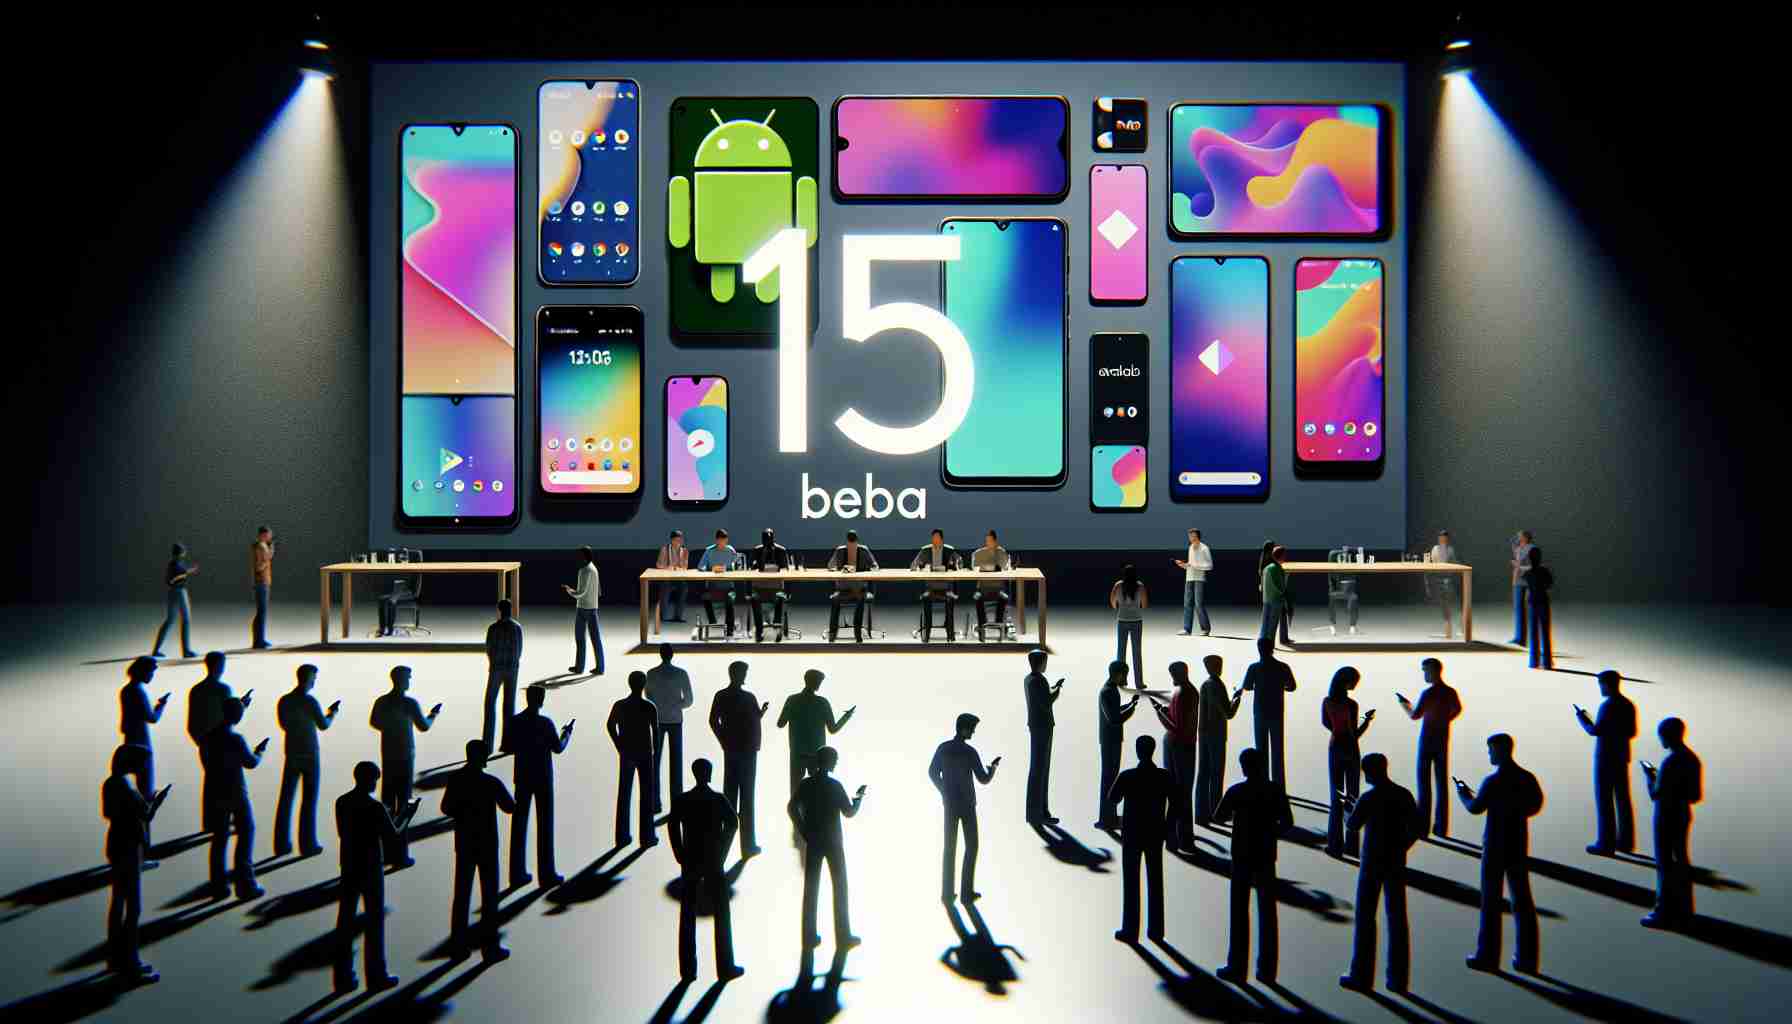 Android 15 Beta Rolls Out to Several Smartphone Brands